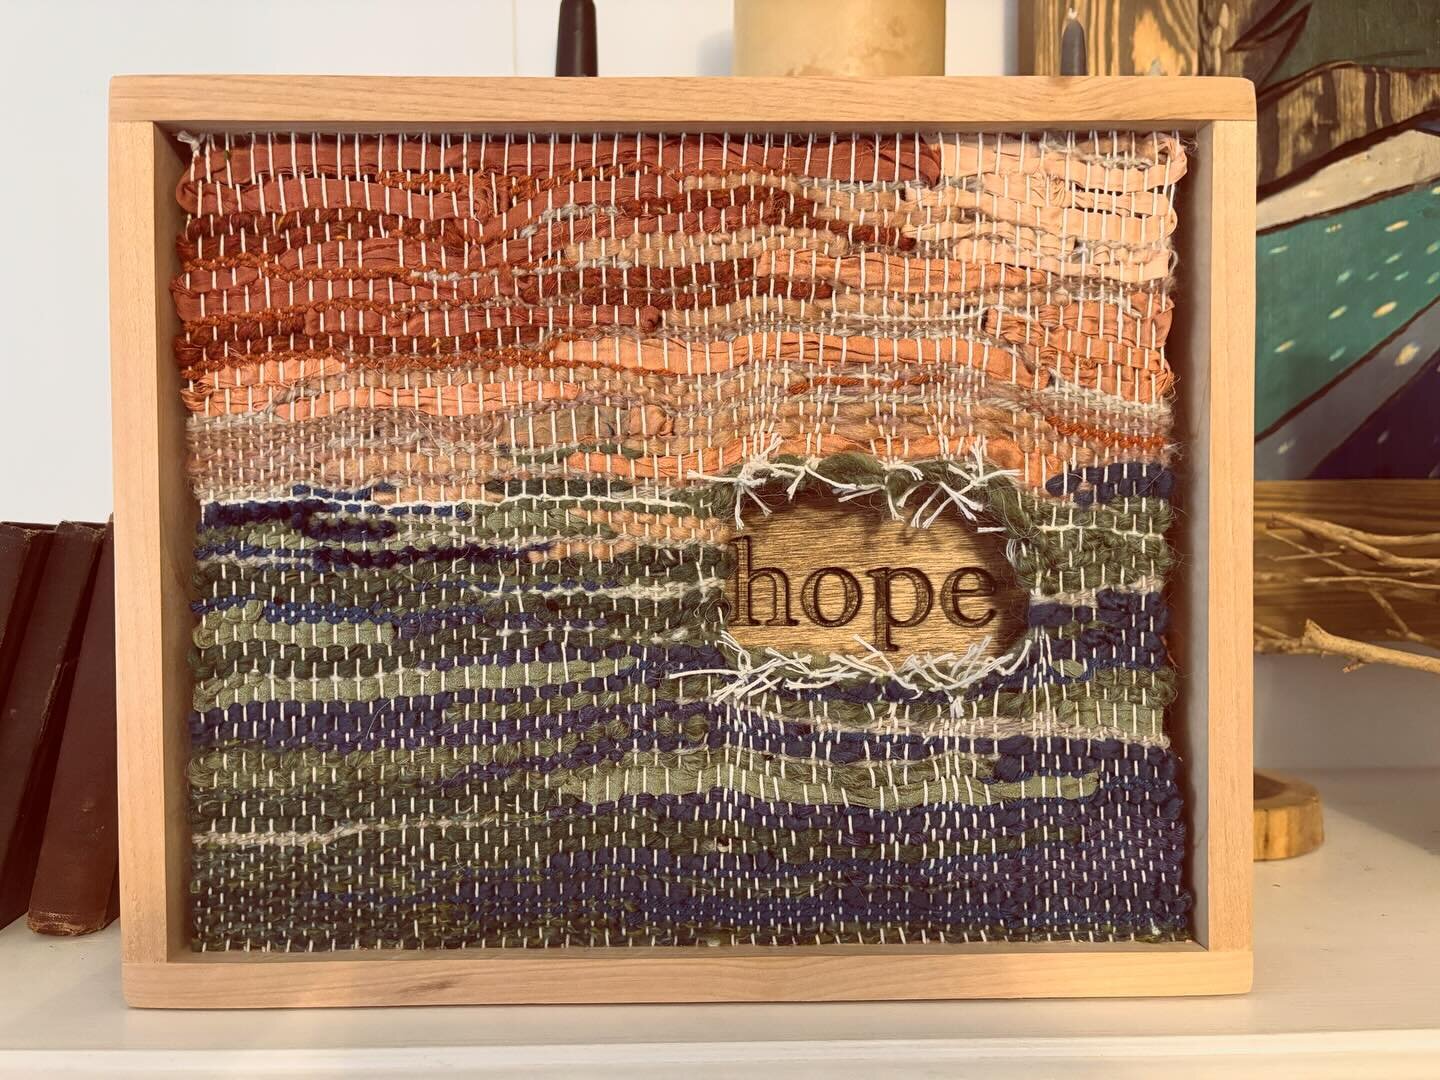 hope is the only thing stronger than fear. 

#3pinesmercantile #hope #wovenart #weaving